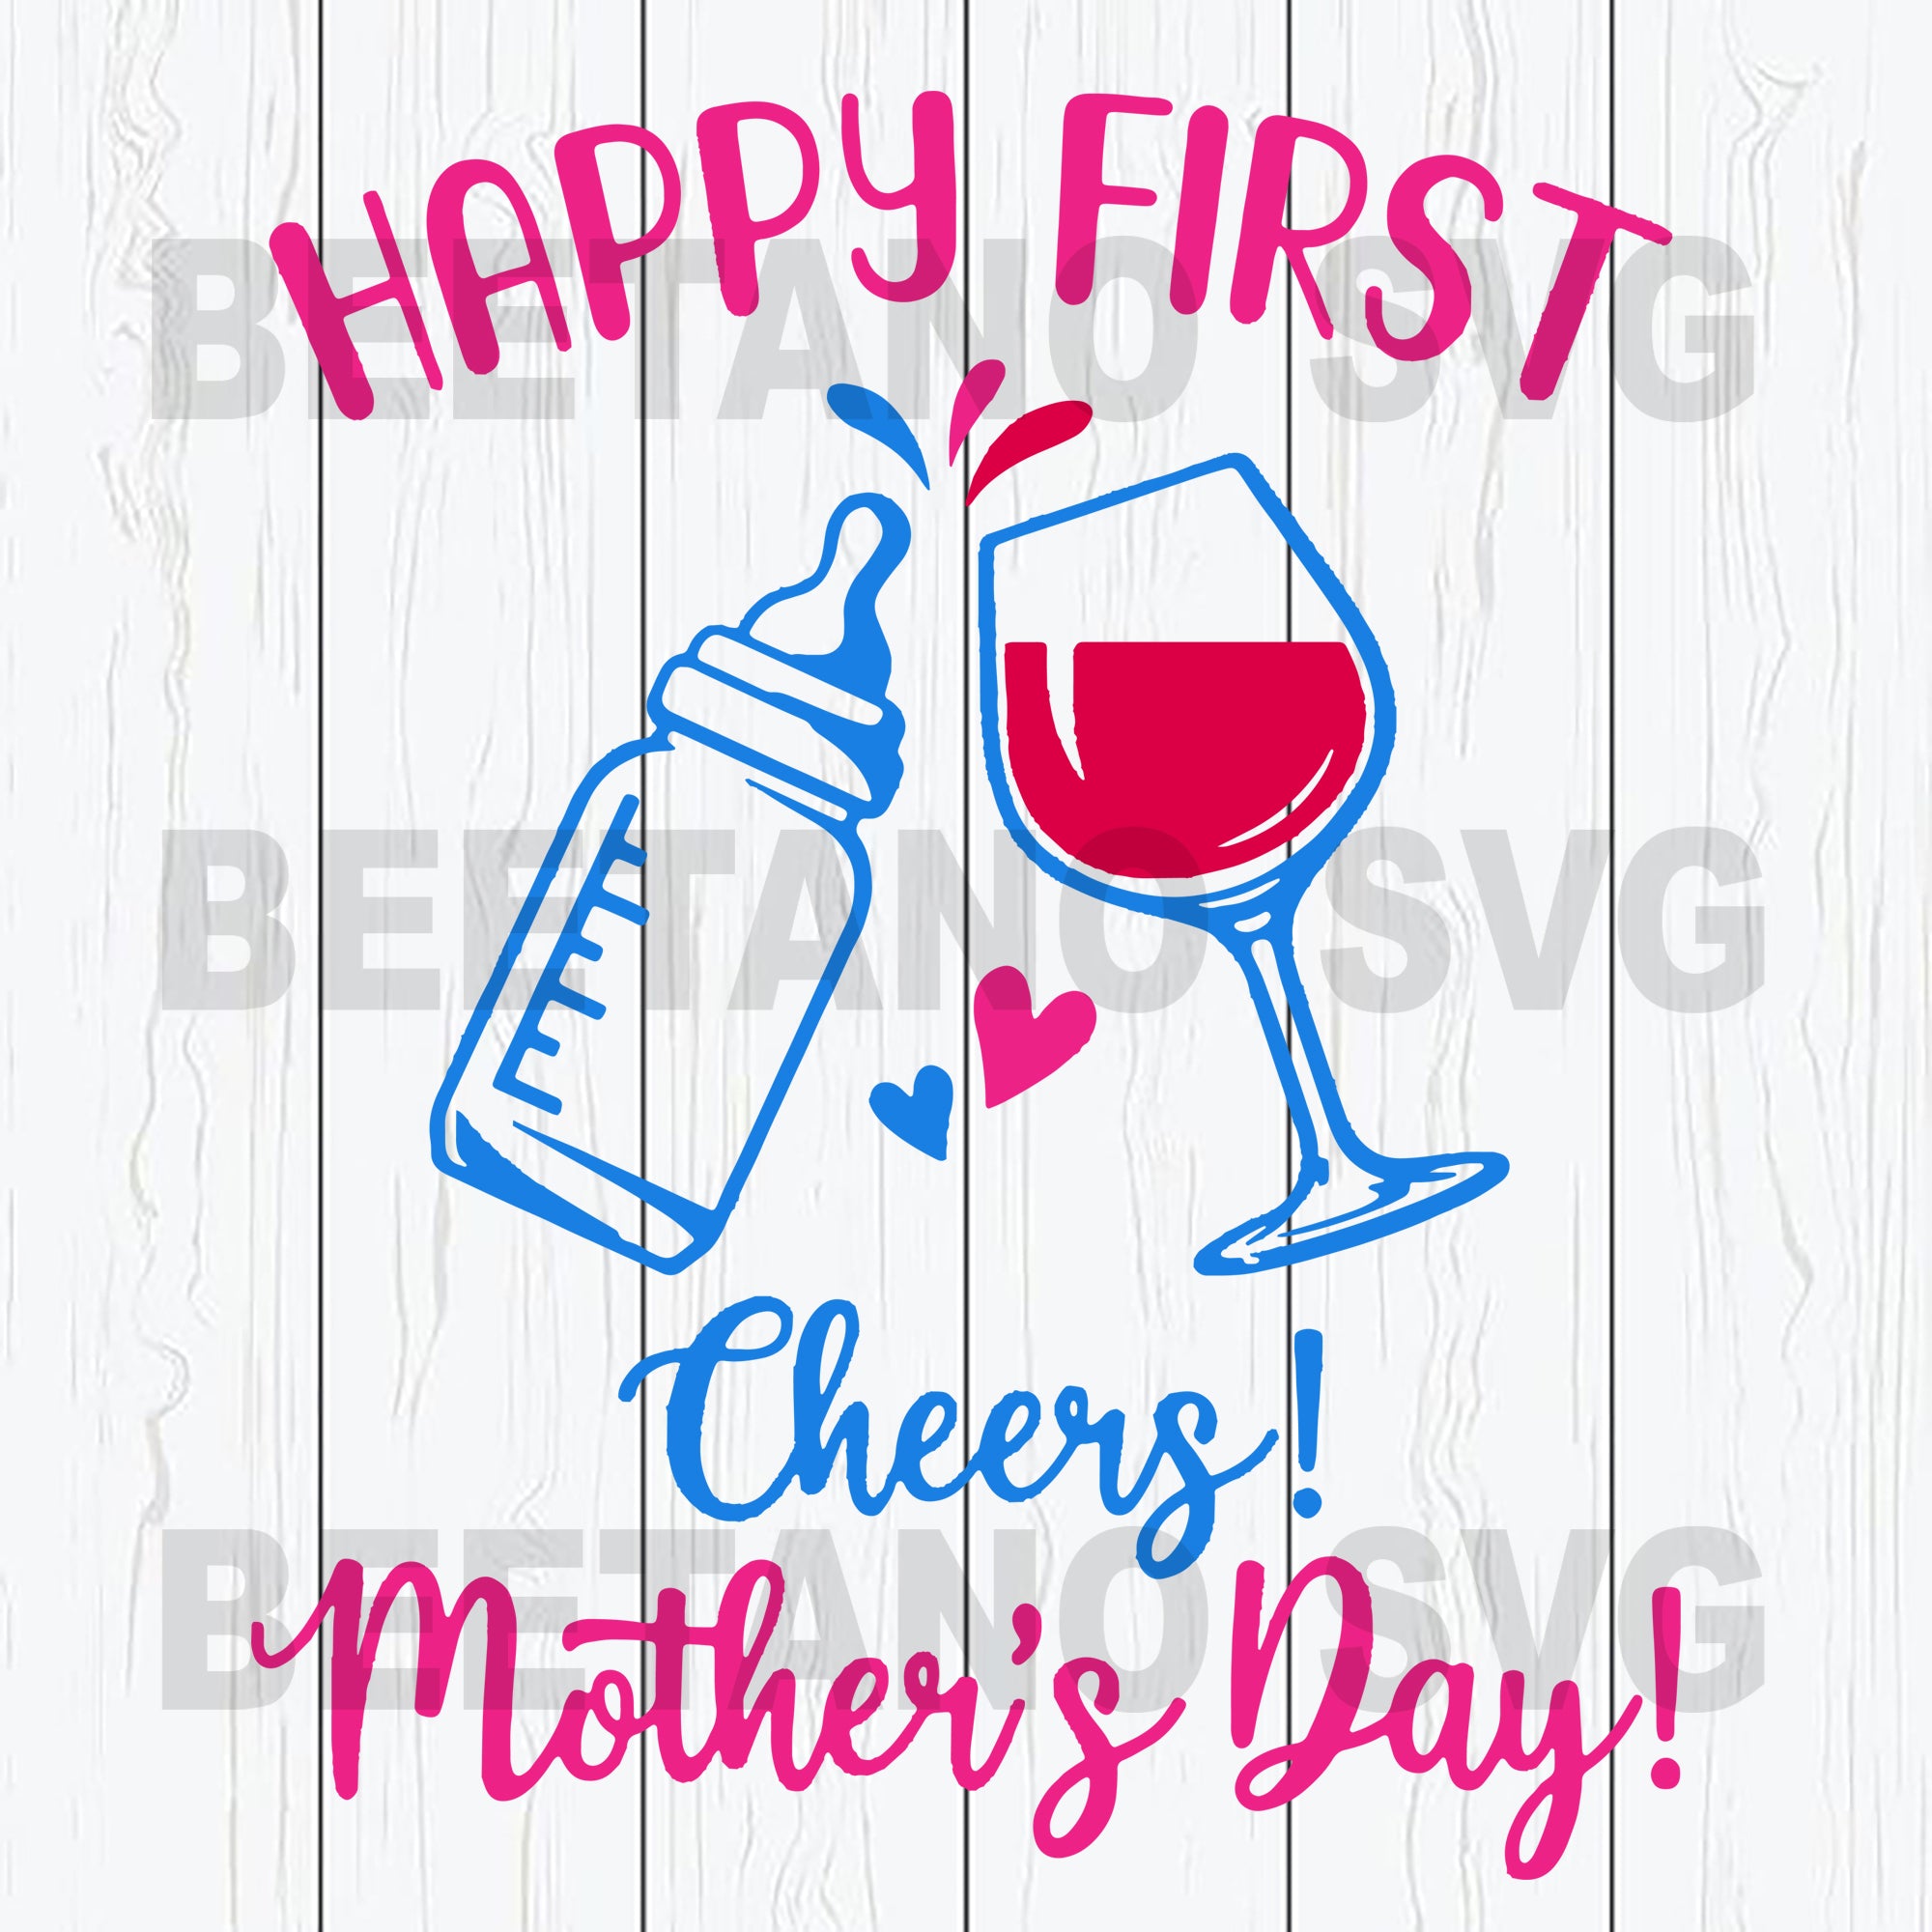 Download Happy First Cheers Mother S Day Svg Files Mother S Day Svg Files